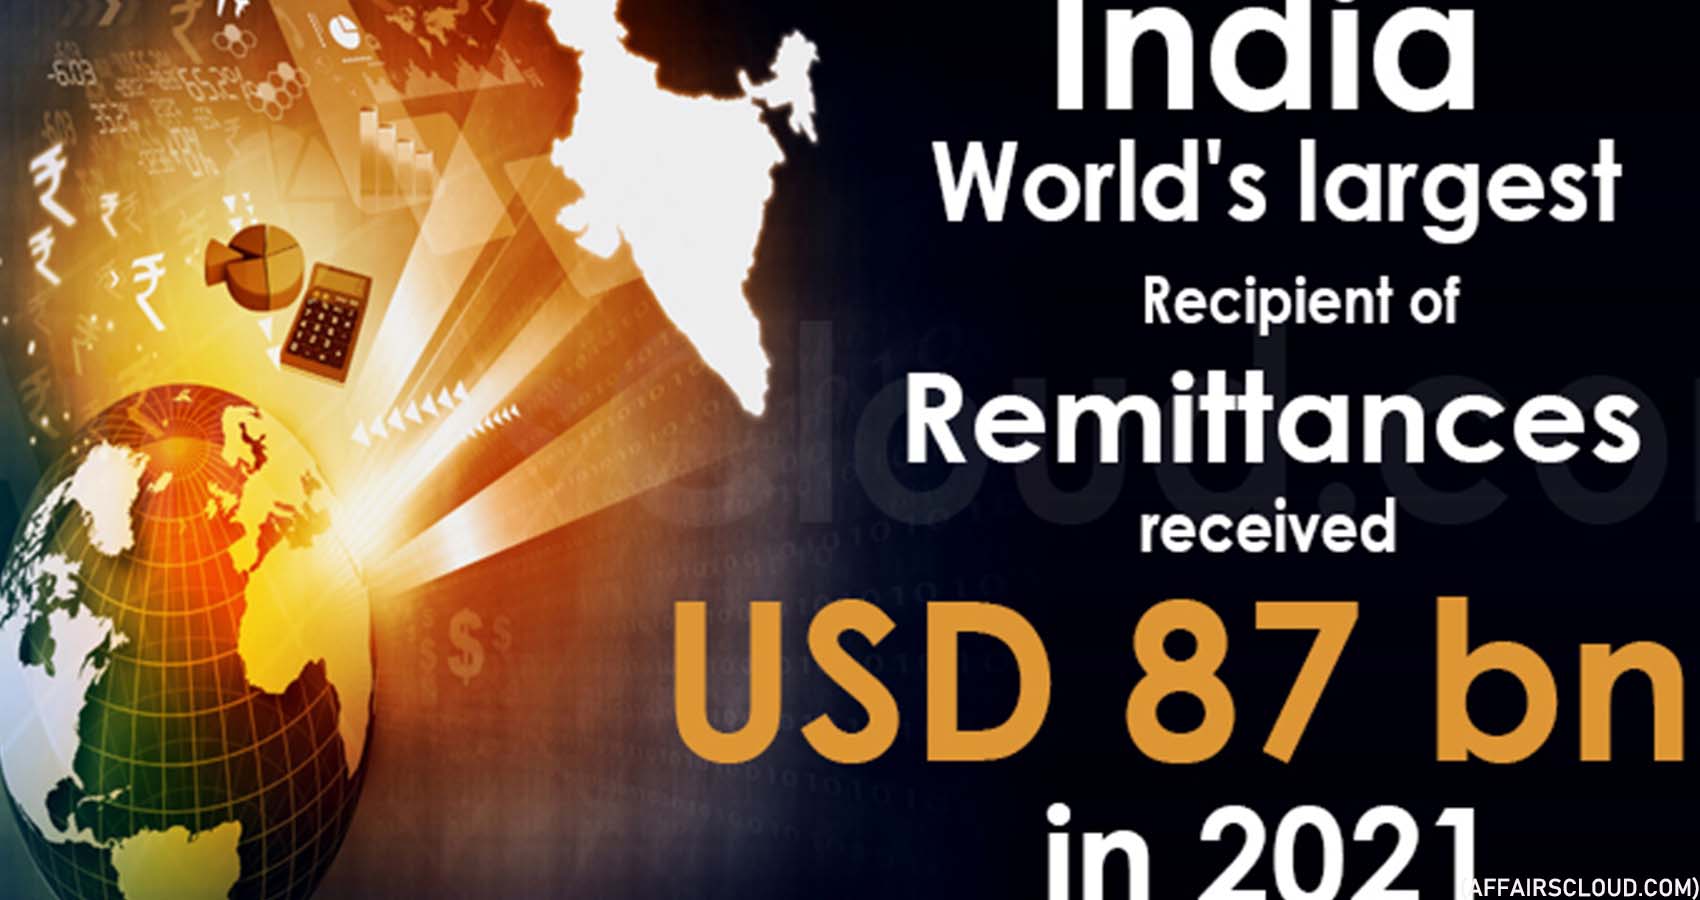 World Bank Reports, India Received Largest Remittances In 2021